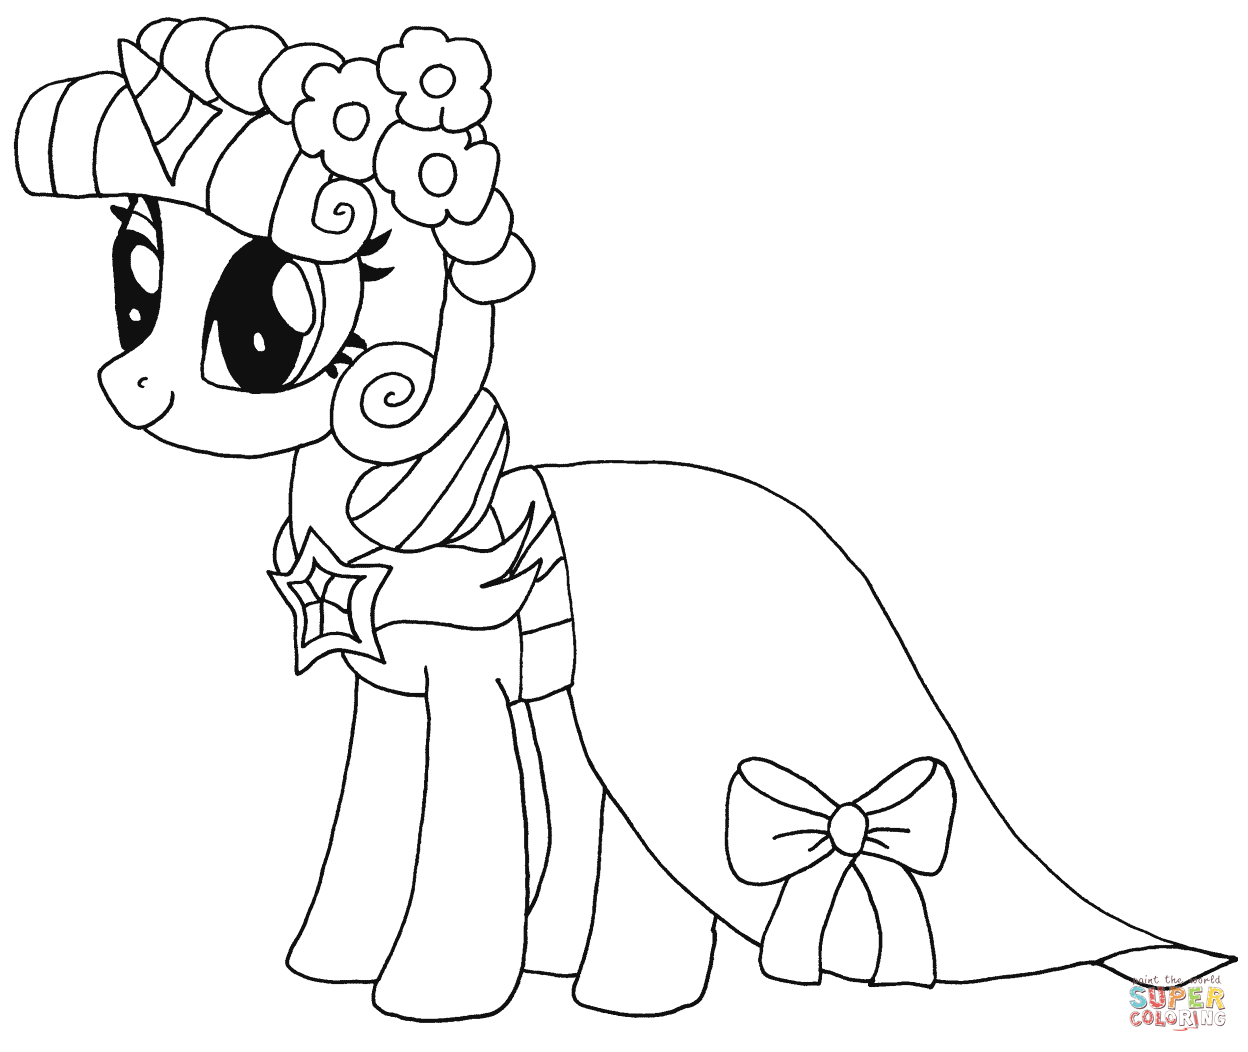 Princess twilight sparkle coloring page free printable coloring pages